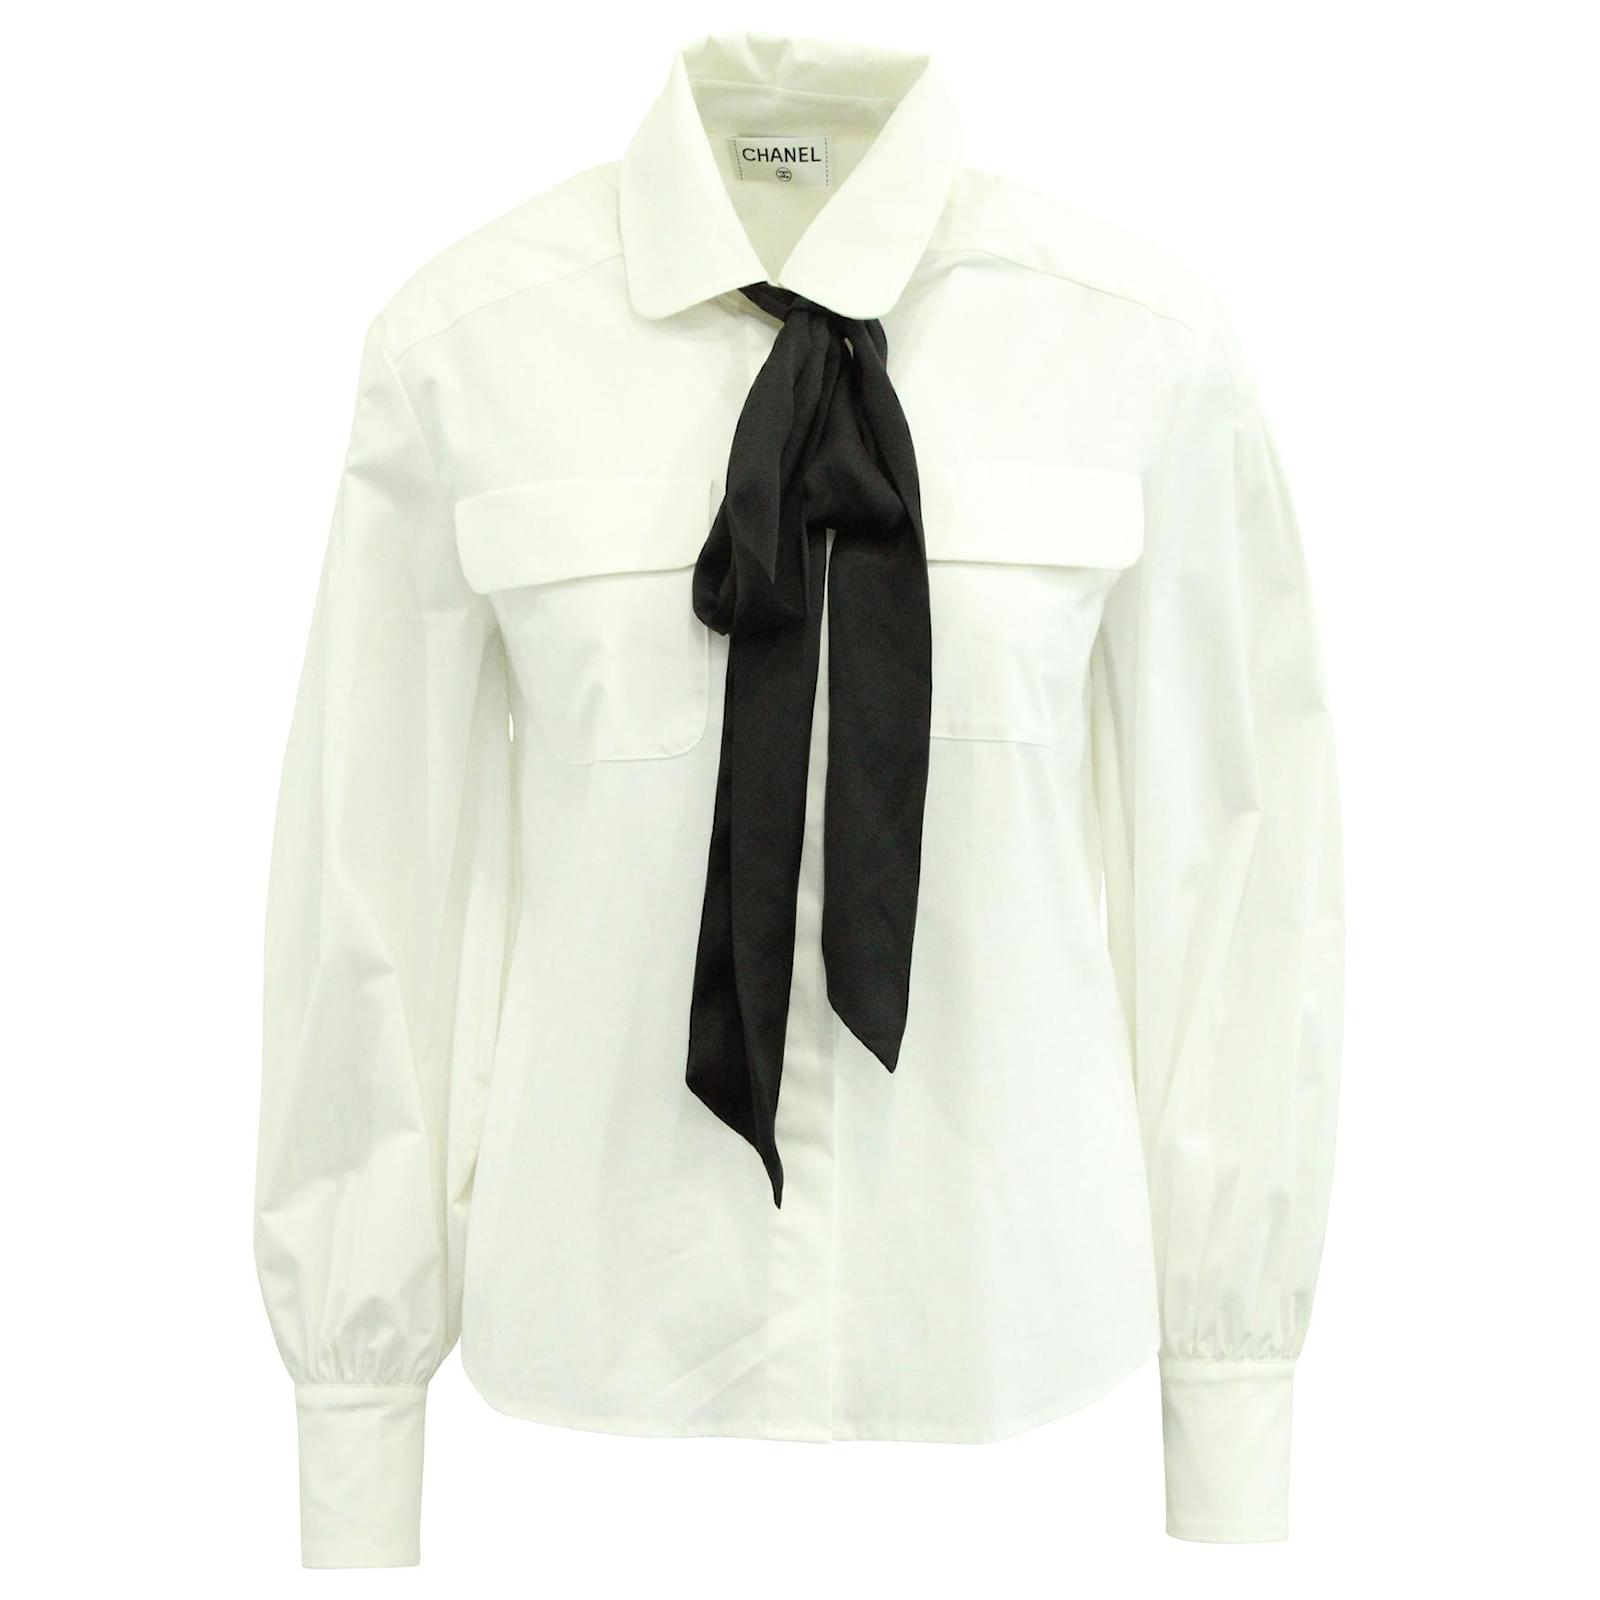 Chanel Contrast Neck Tie Detail Blouse in White Cotton